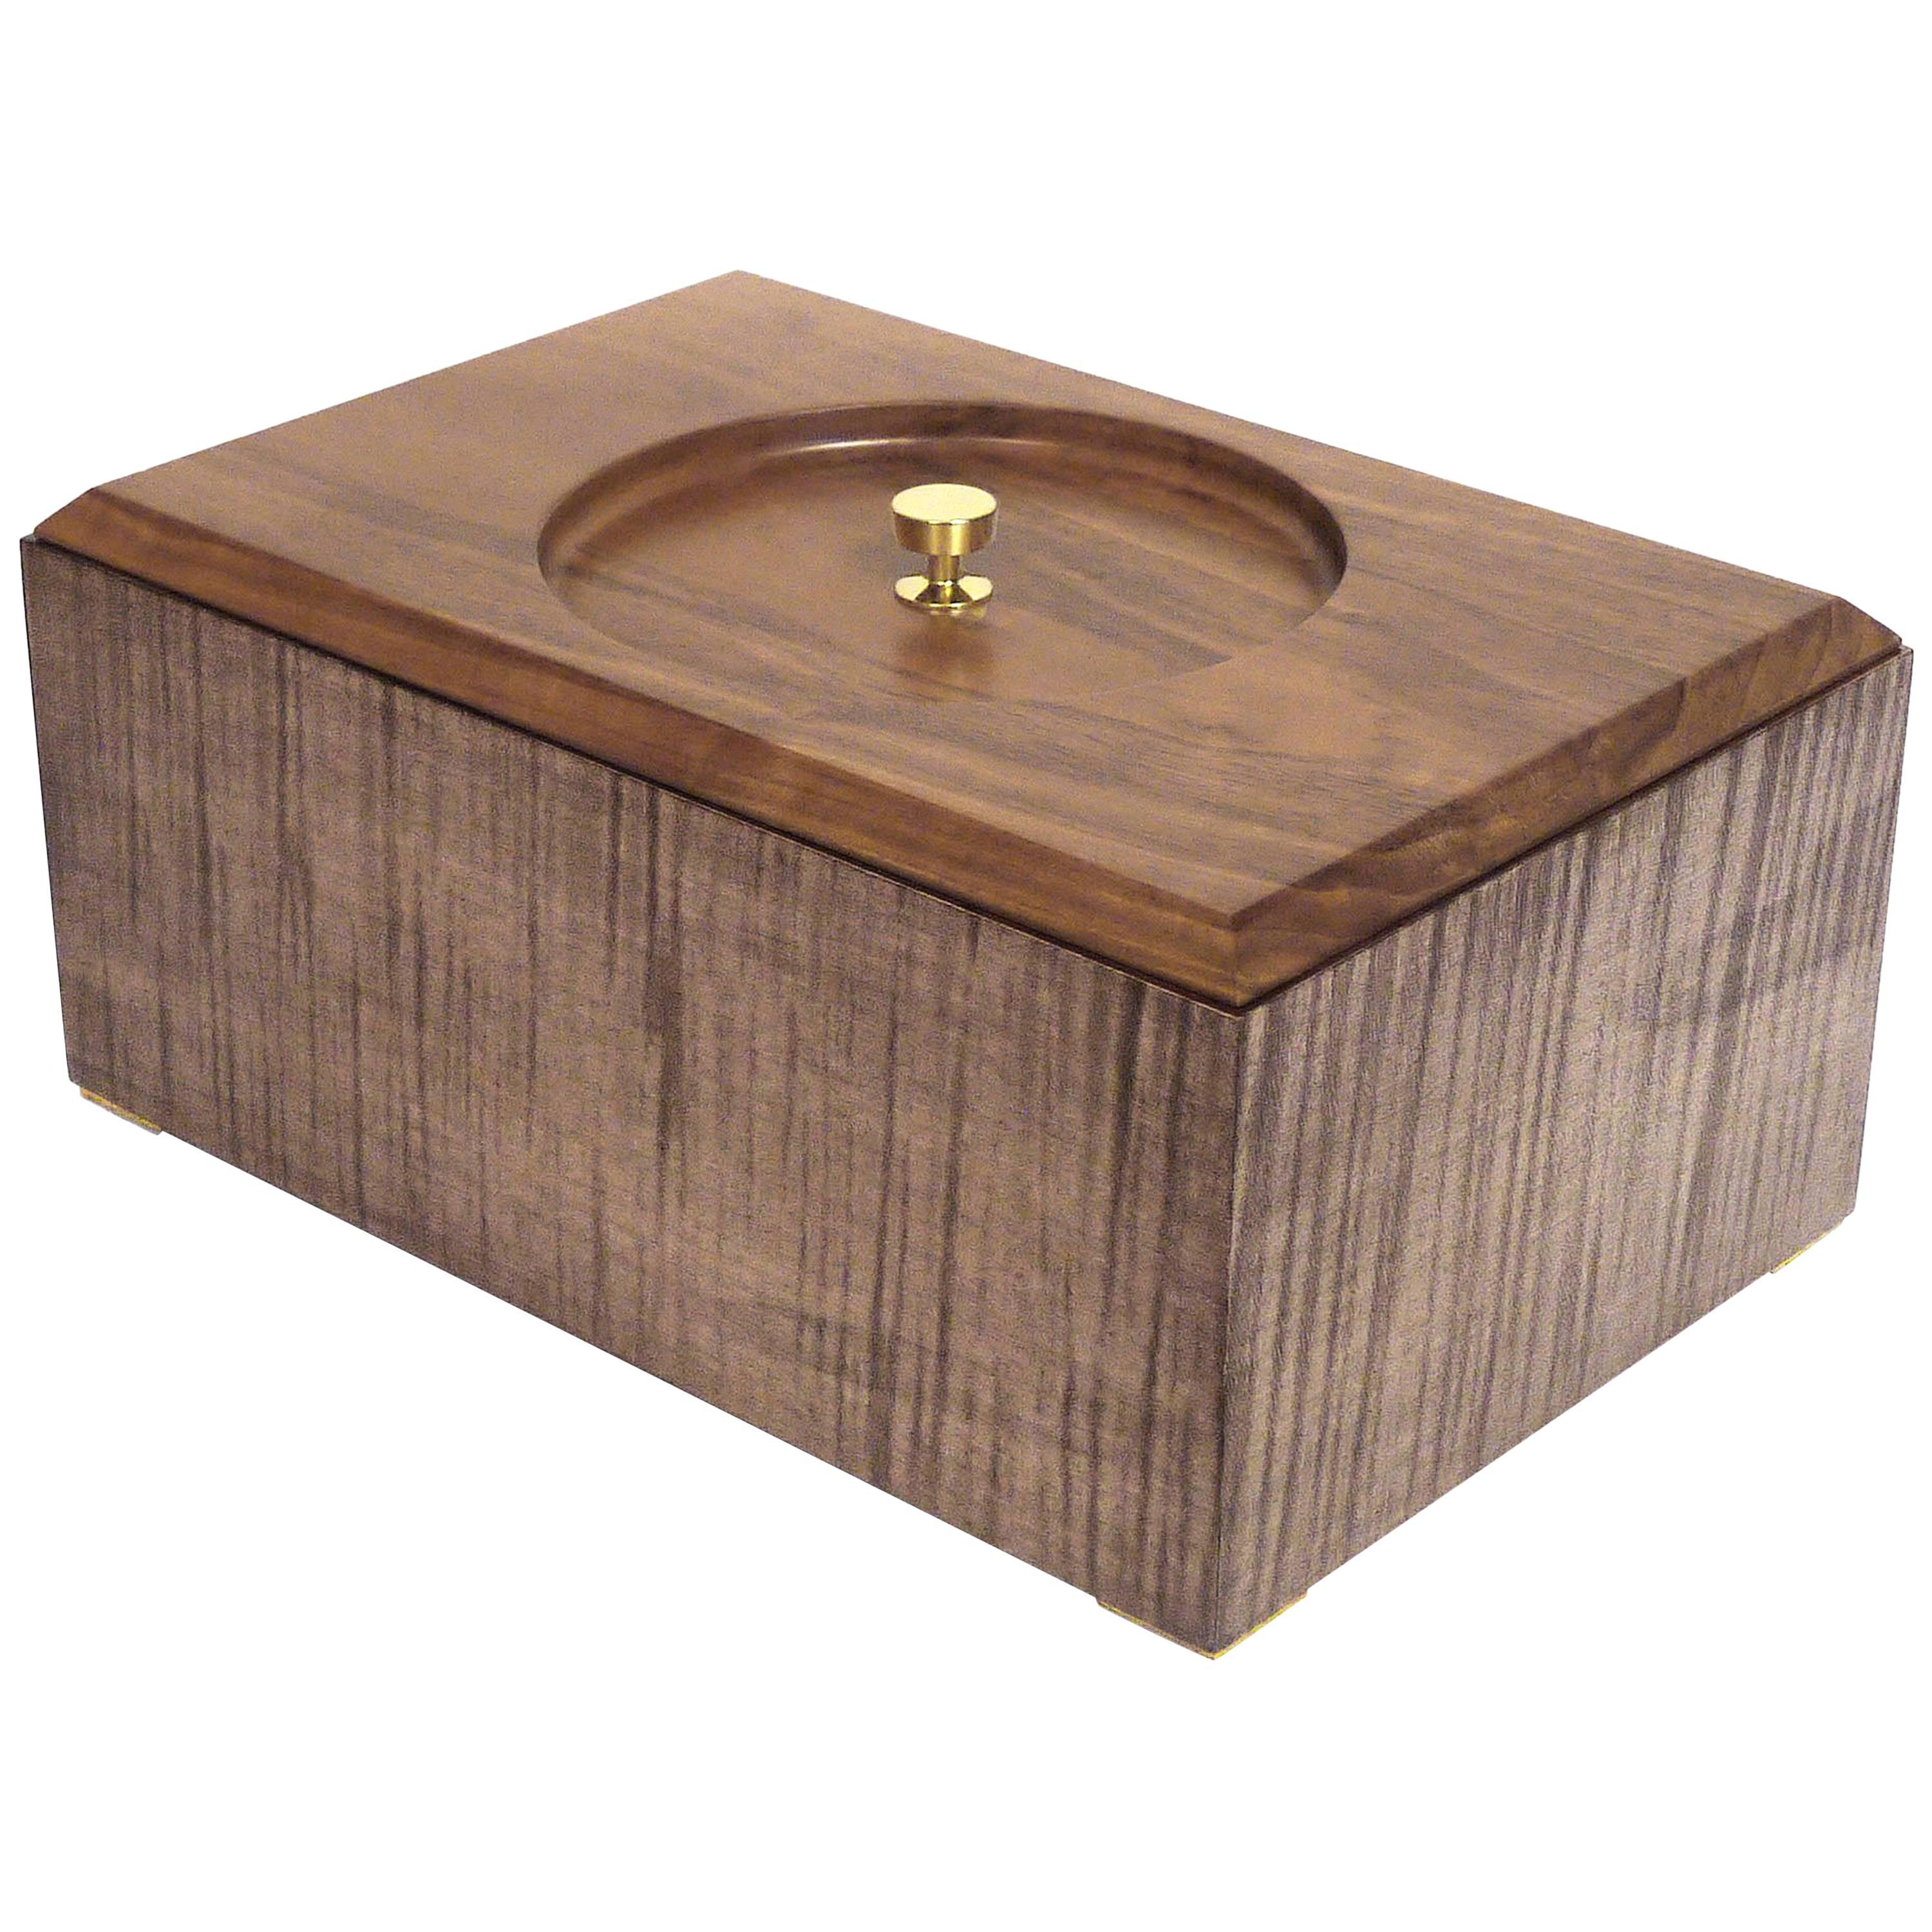 Contemporary Sycamore and Brass Modern Minimalist Wood Box For Sale